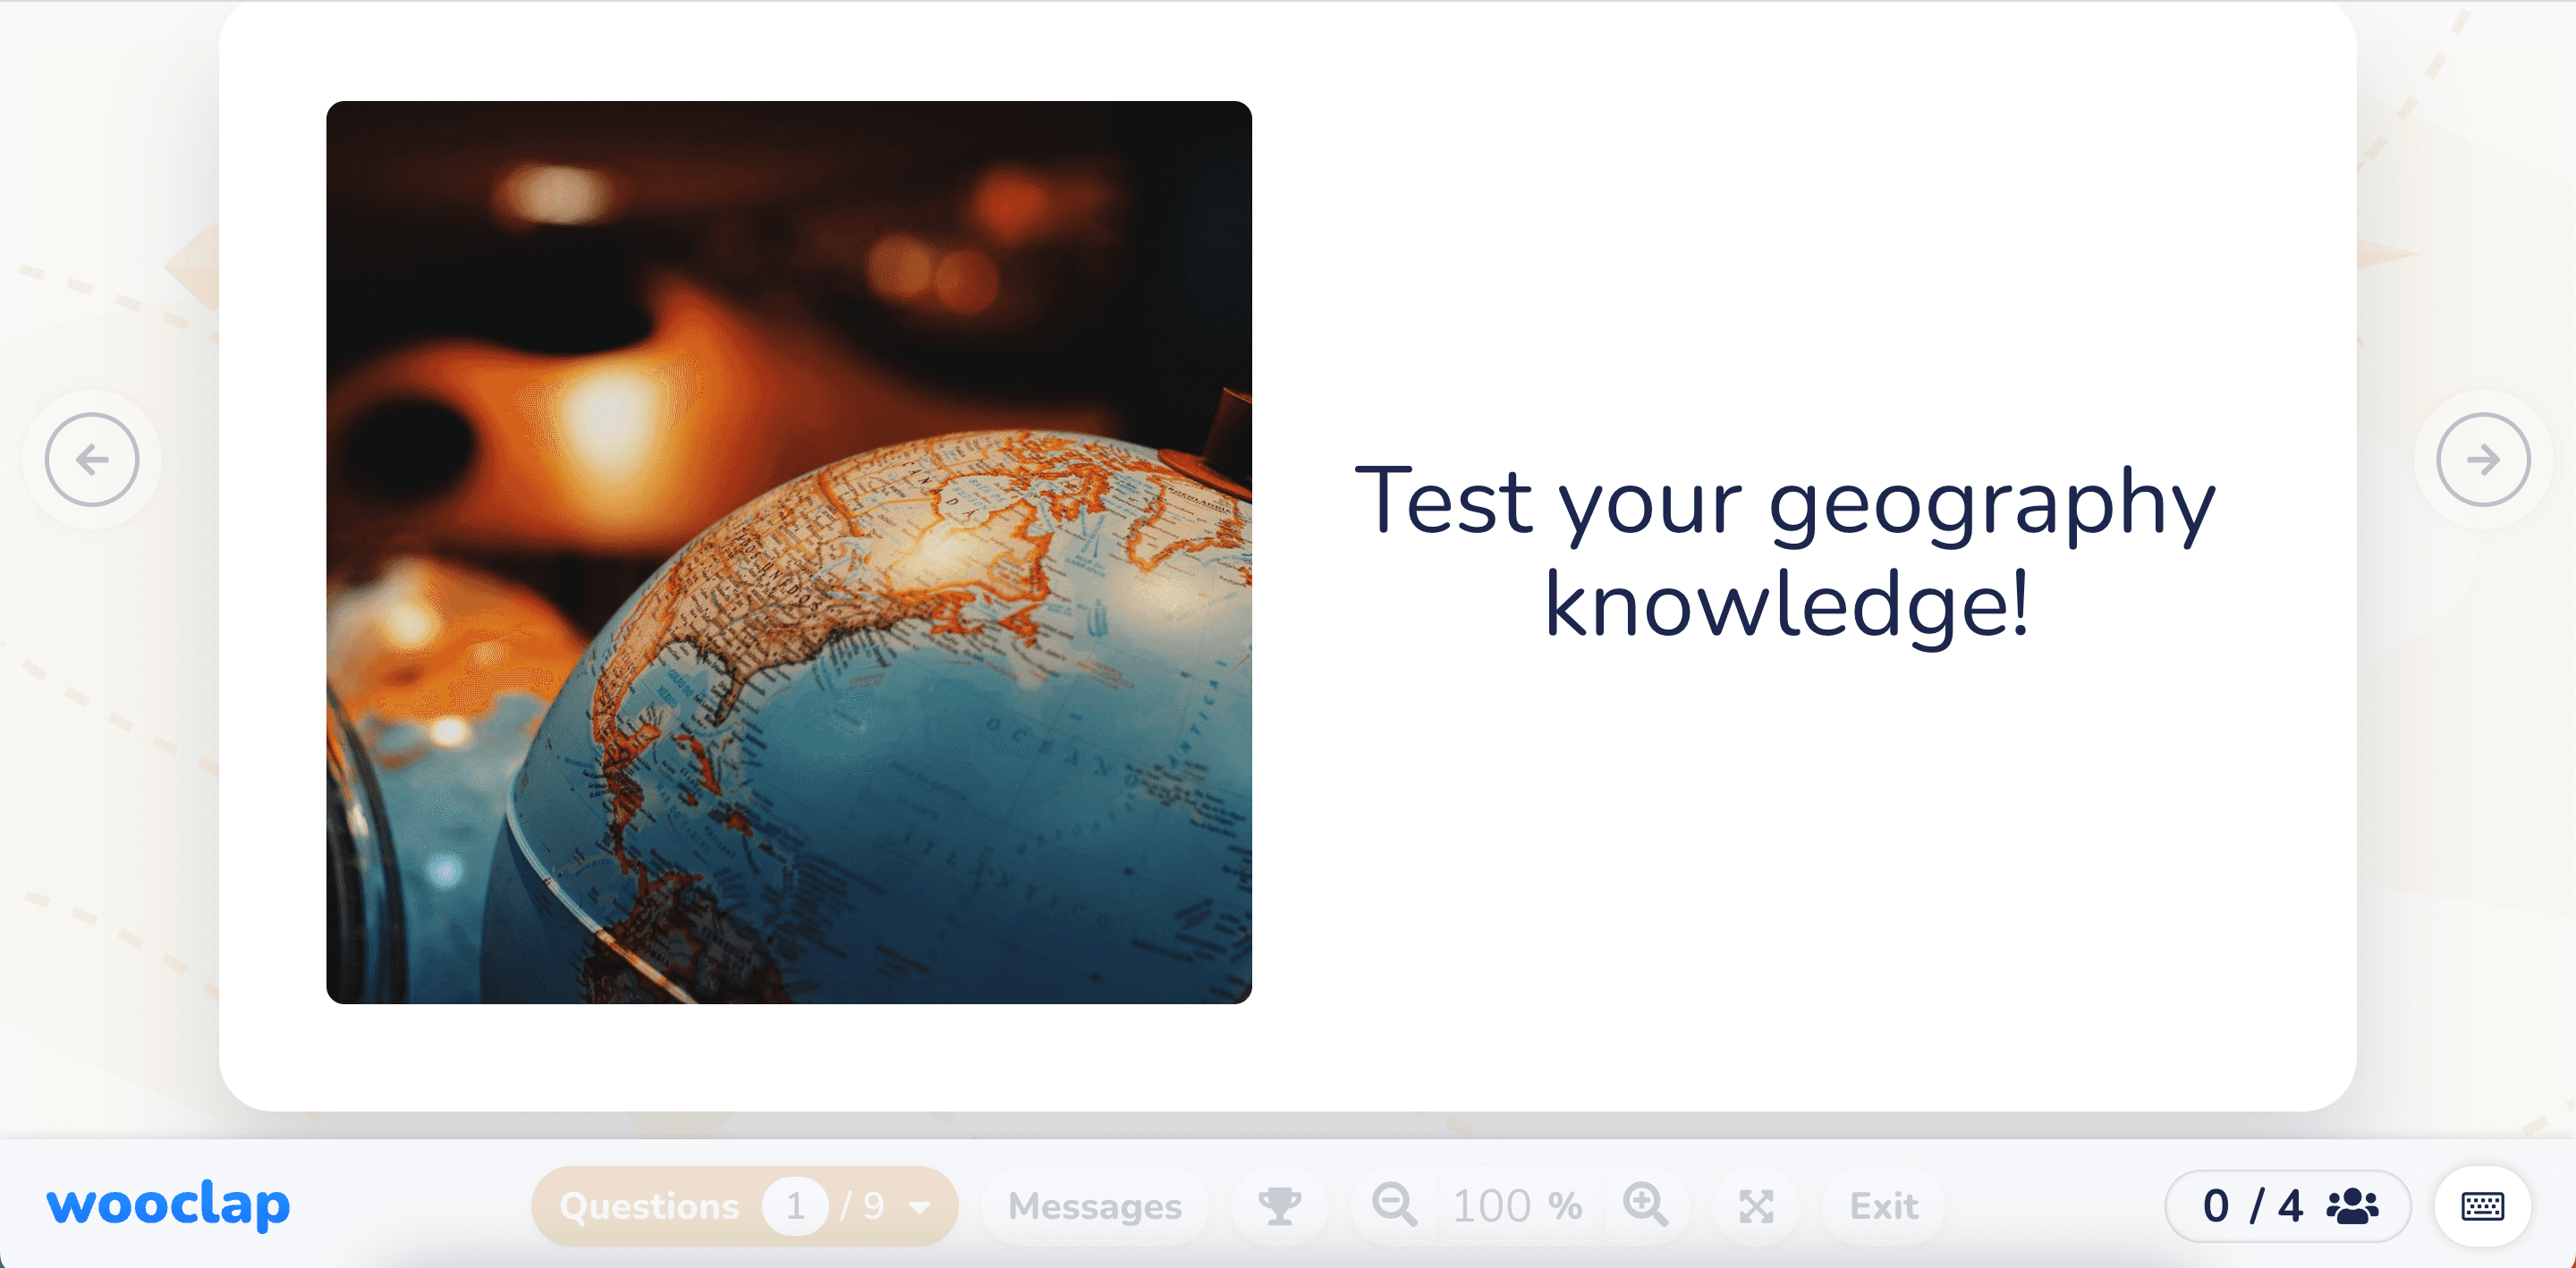 Test your geography knowledge!